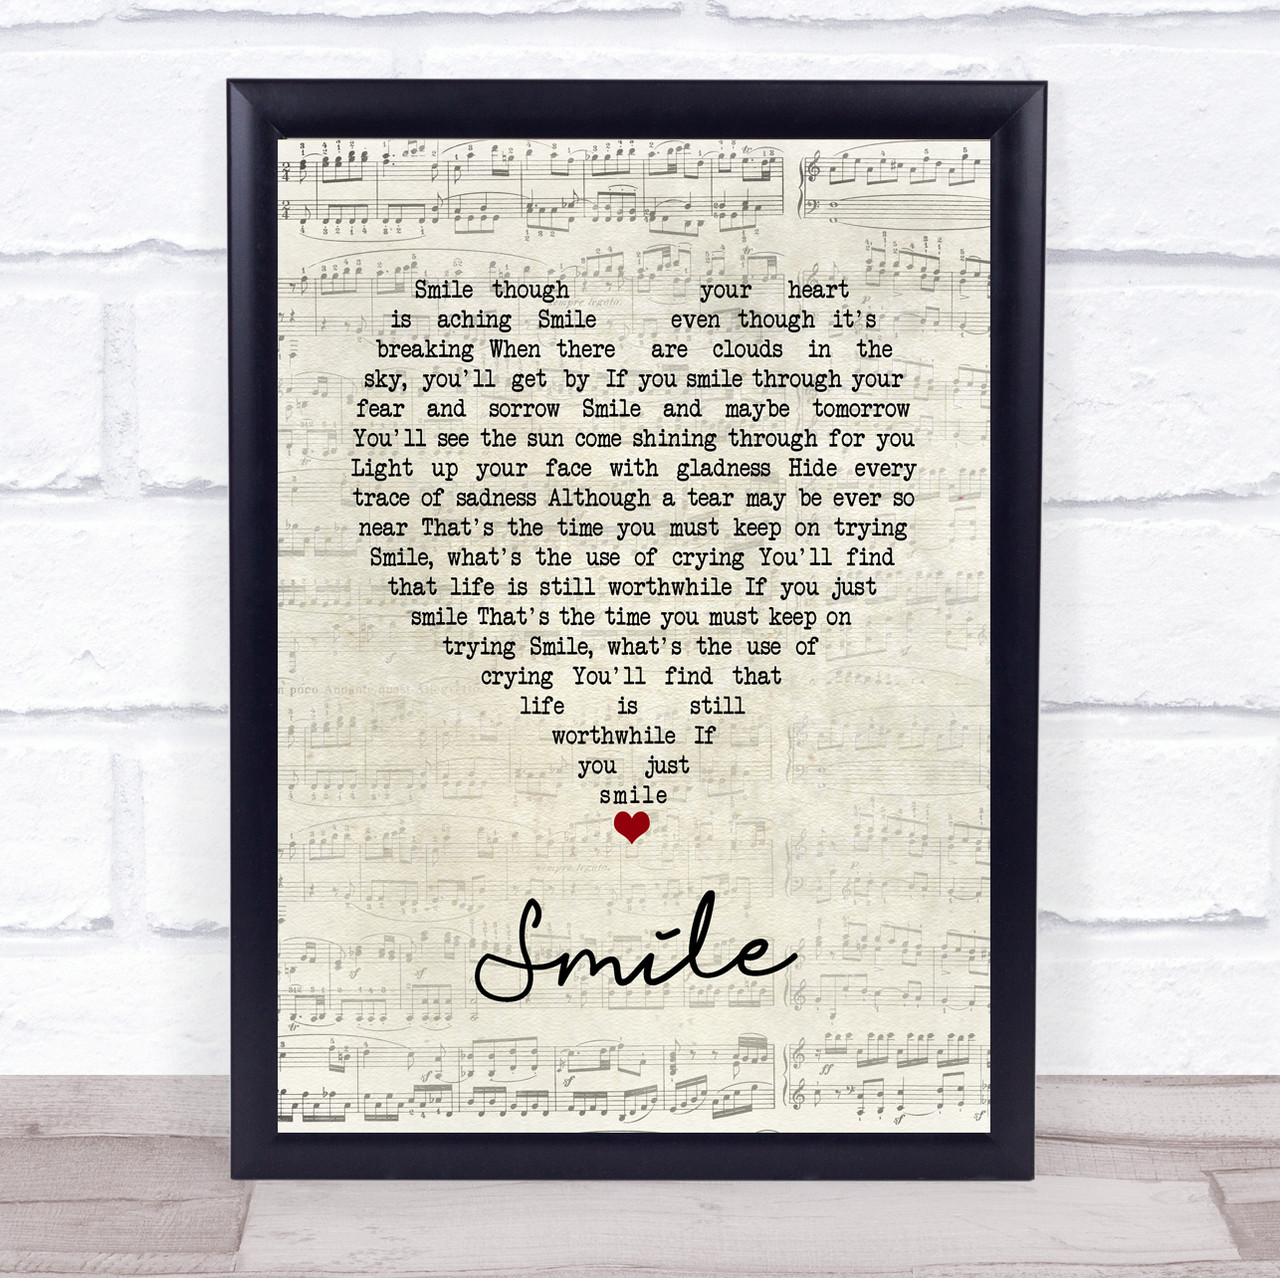 Angel Smile - song and lyrics by Nat King Cole